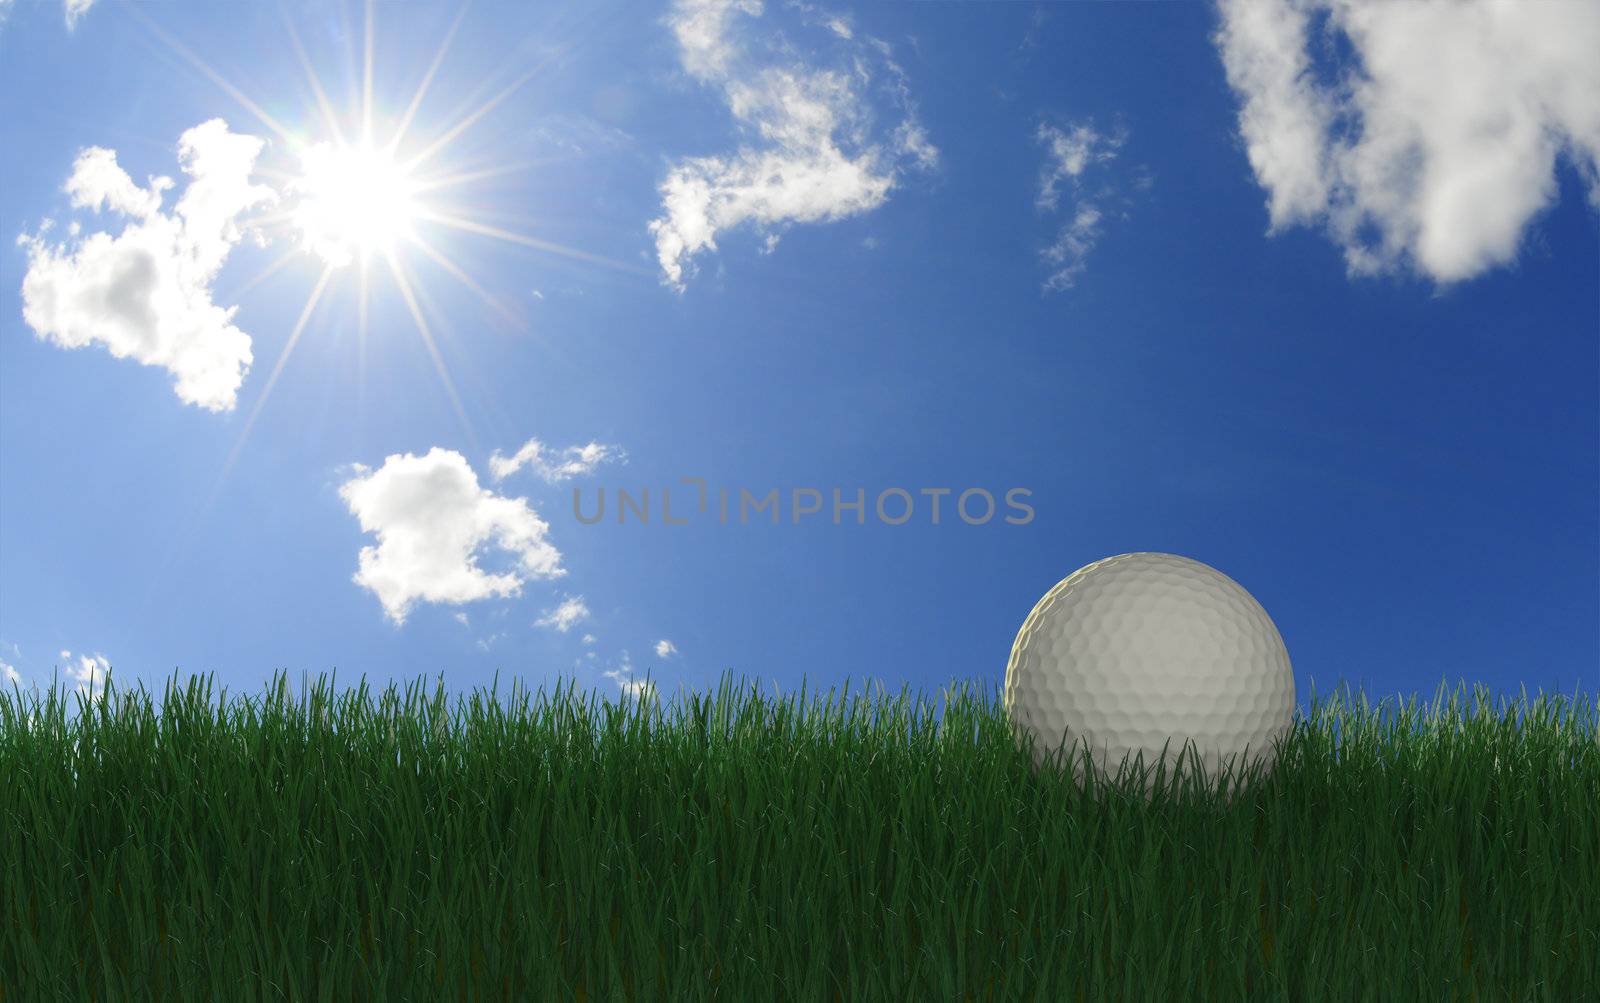 Golfball in long grass with evening sun